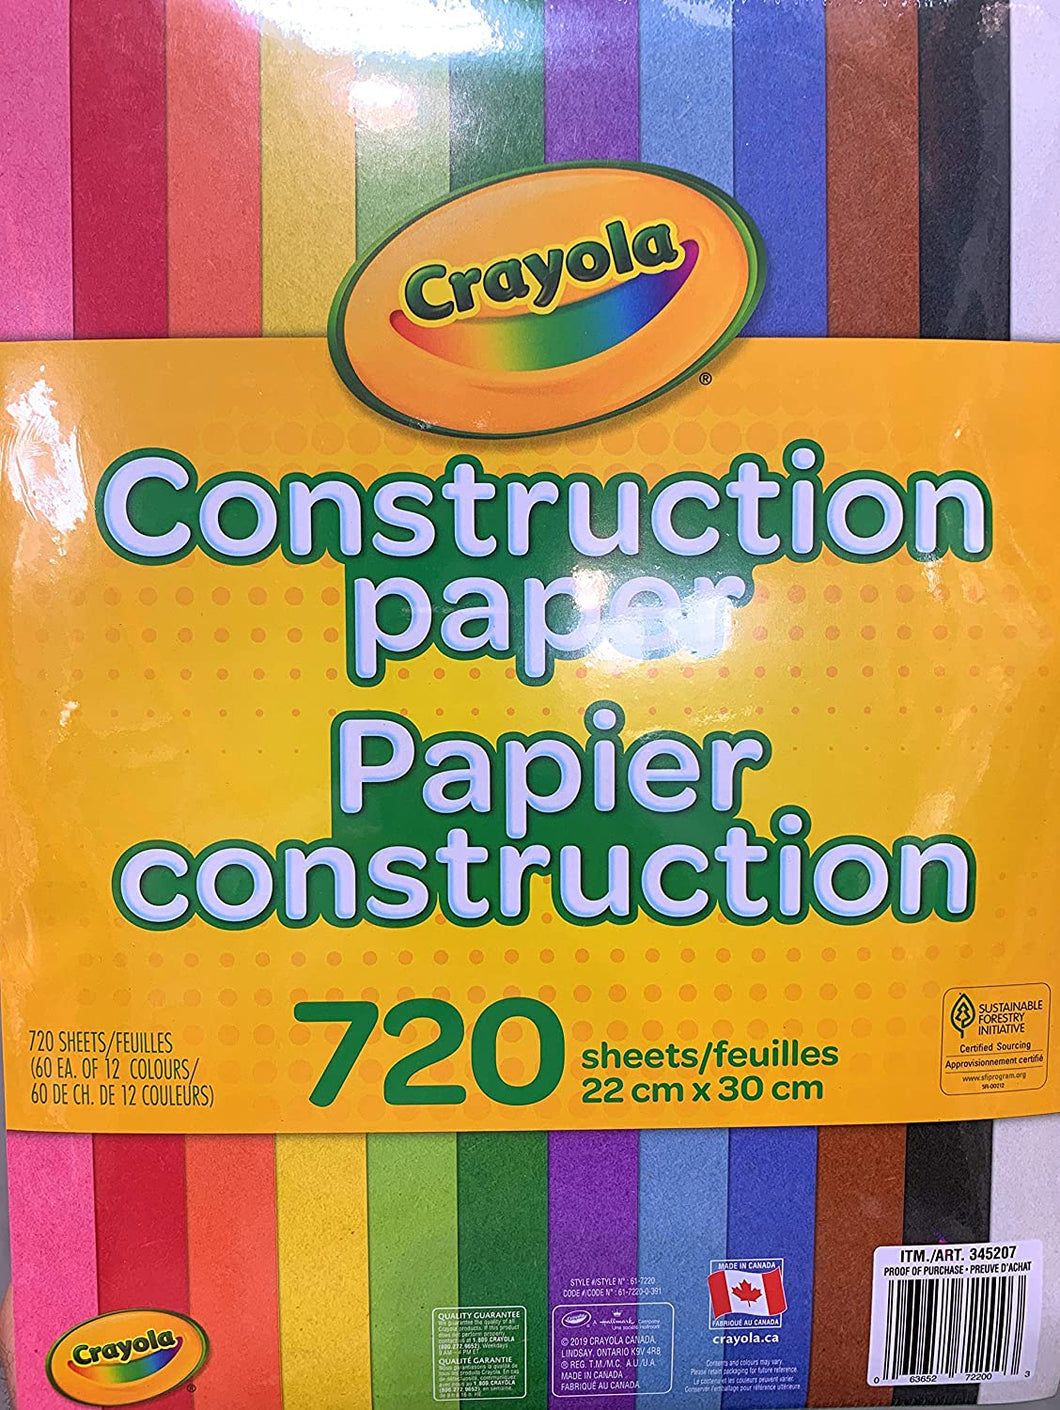 Crayola Construction Paper, 12 Assorted Colors (720 Sheets) esikidz marketplace kid craft kid art painting for kids craft ideas for kids easy crafts for kids